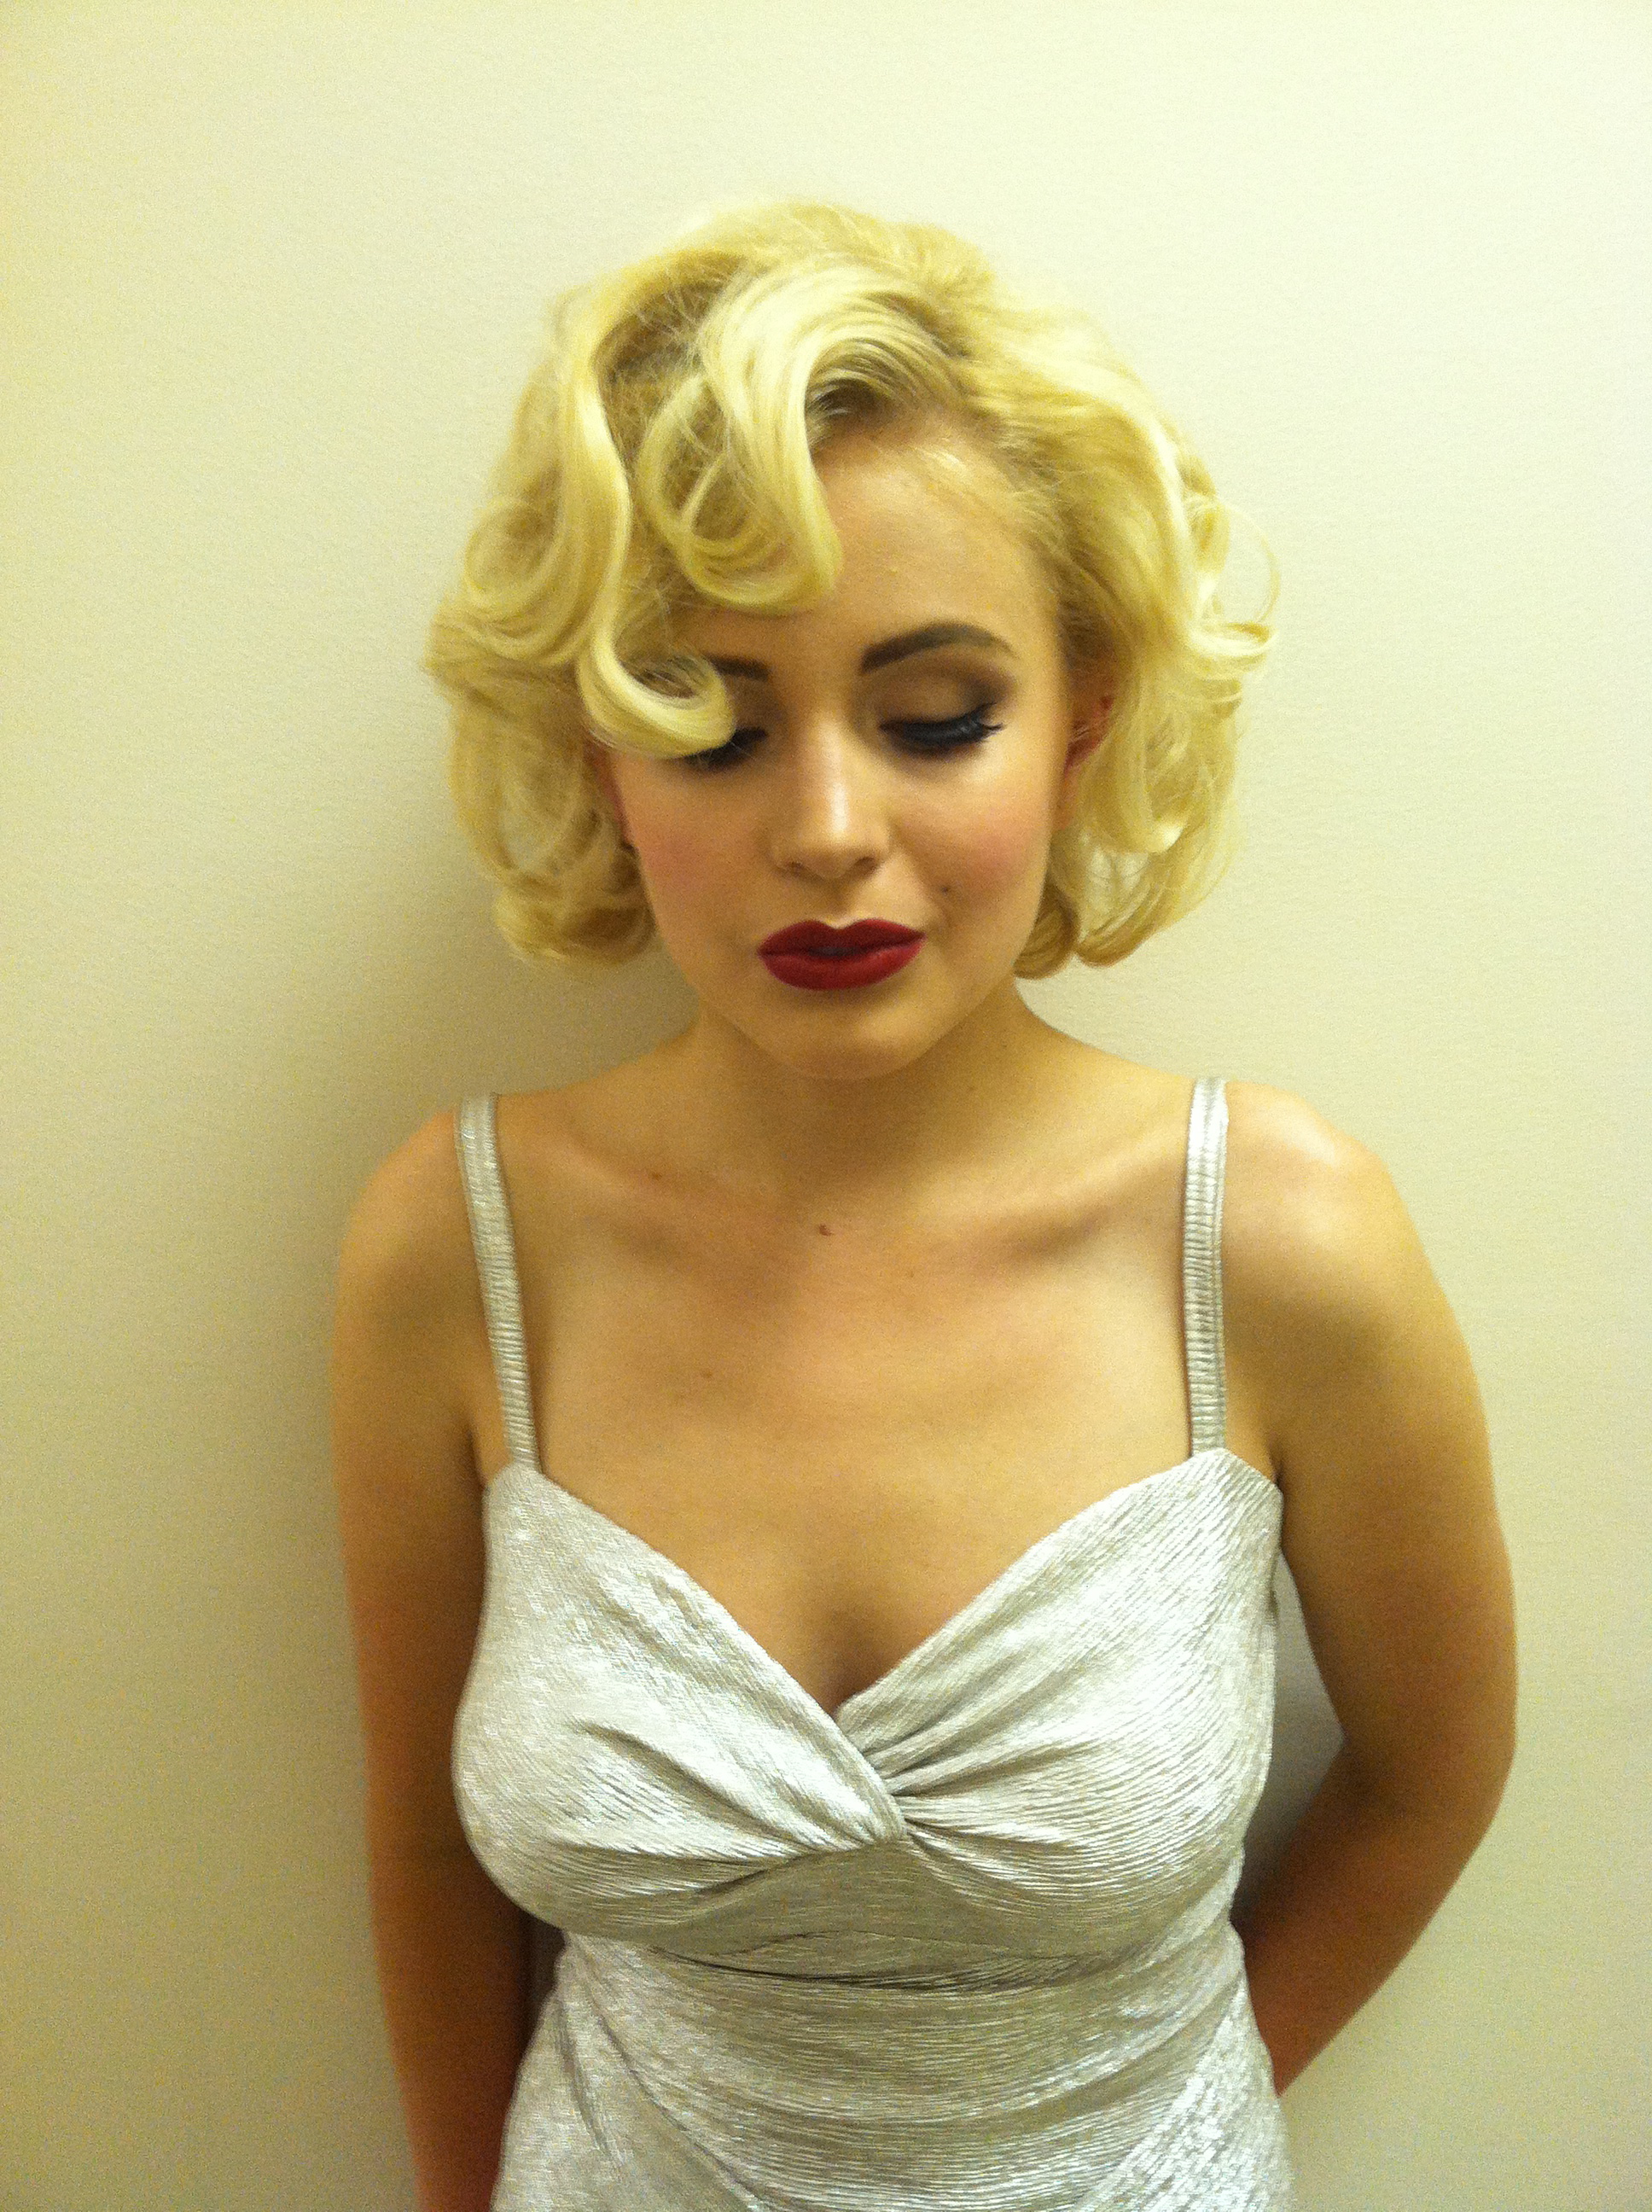 Madison Rose as Marilyn Monroe in the feature film 'Bombshell'